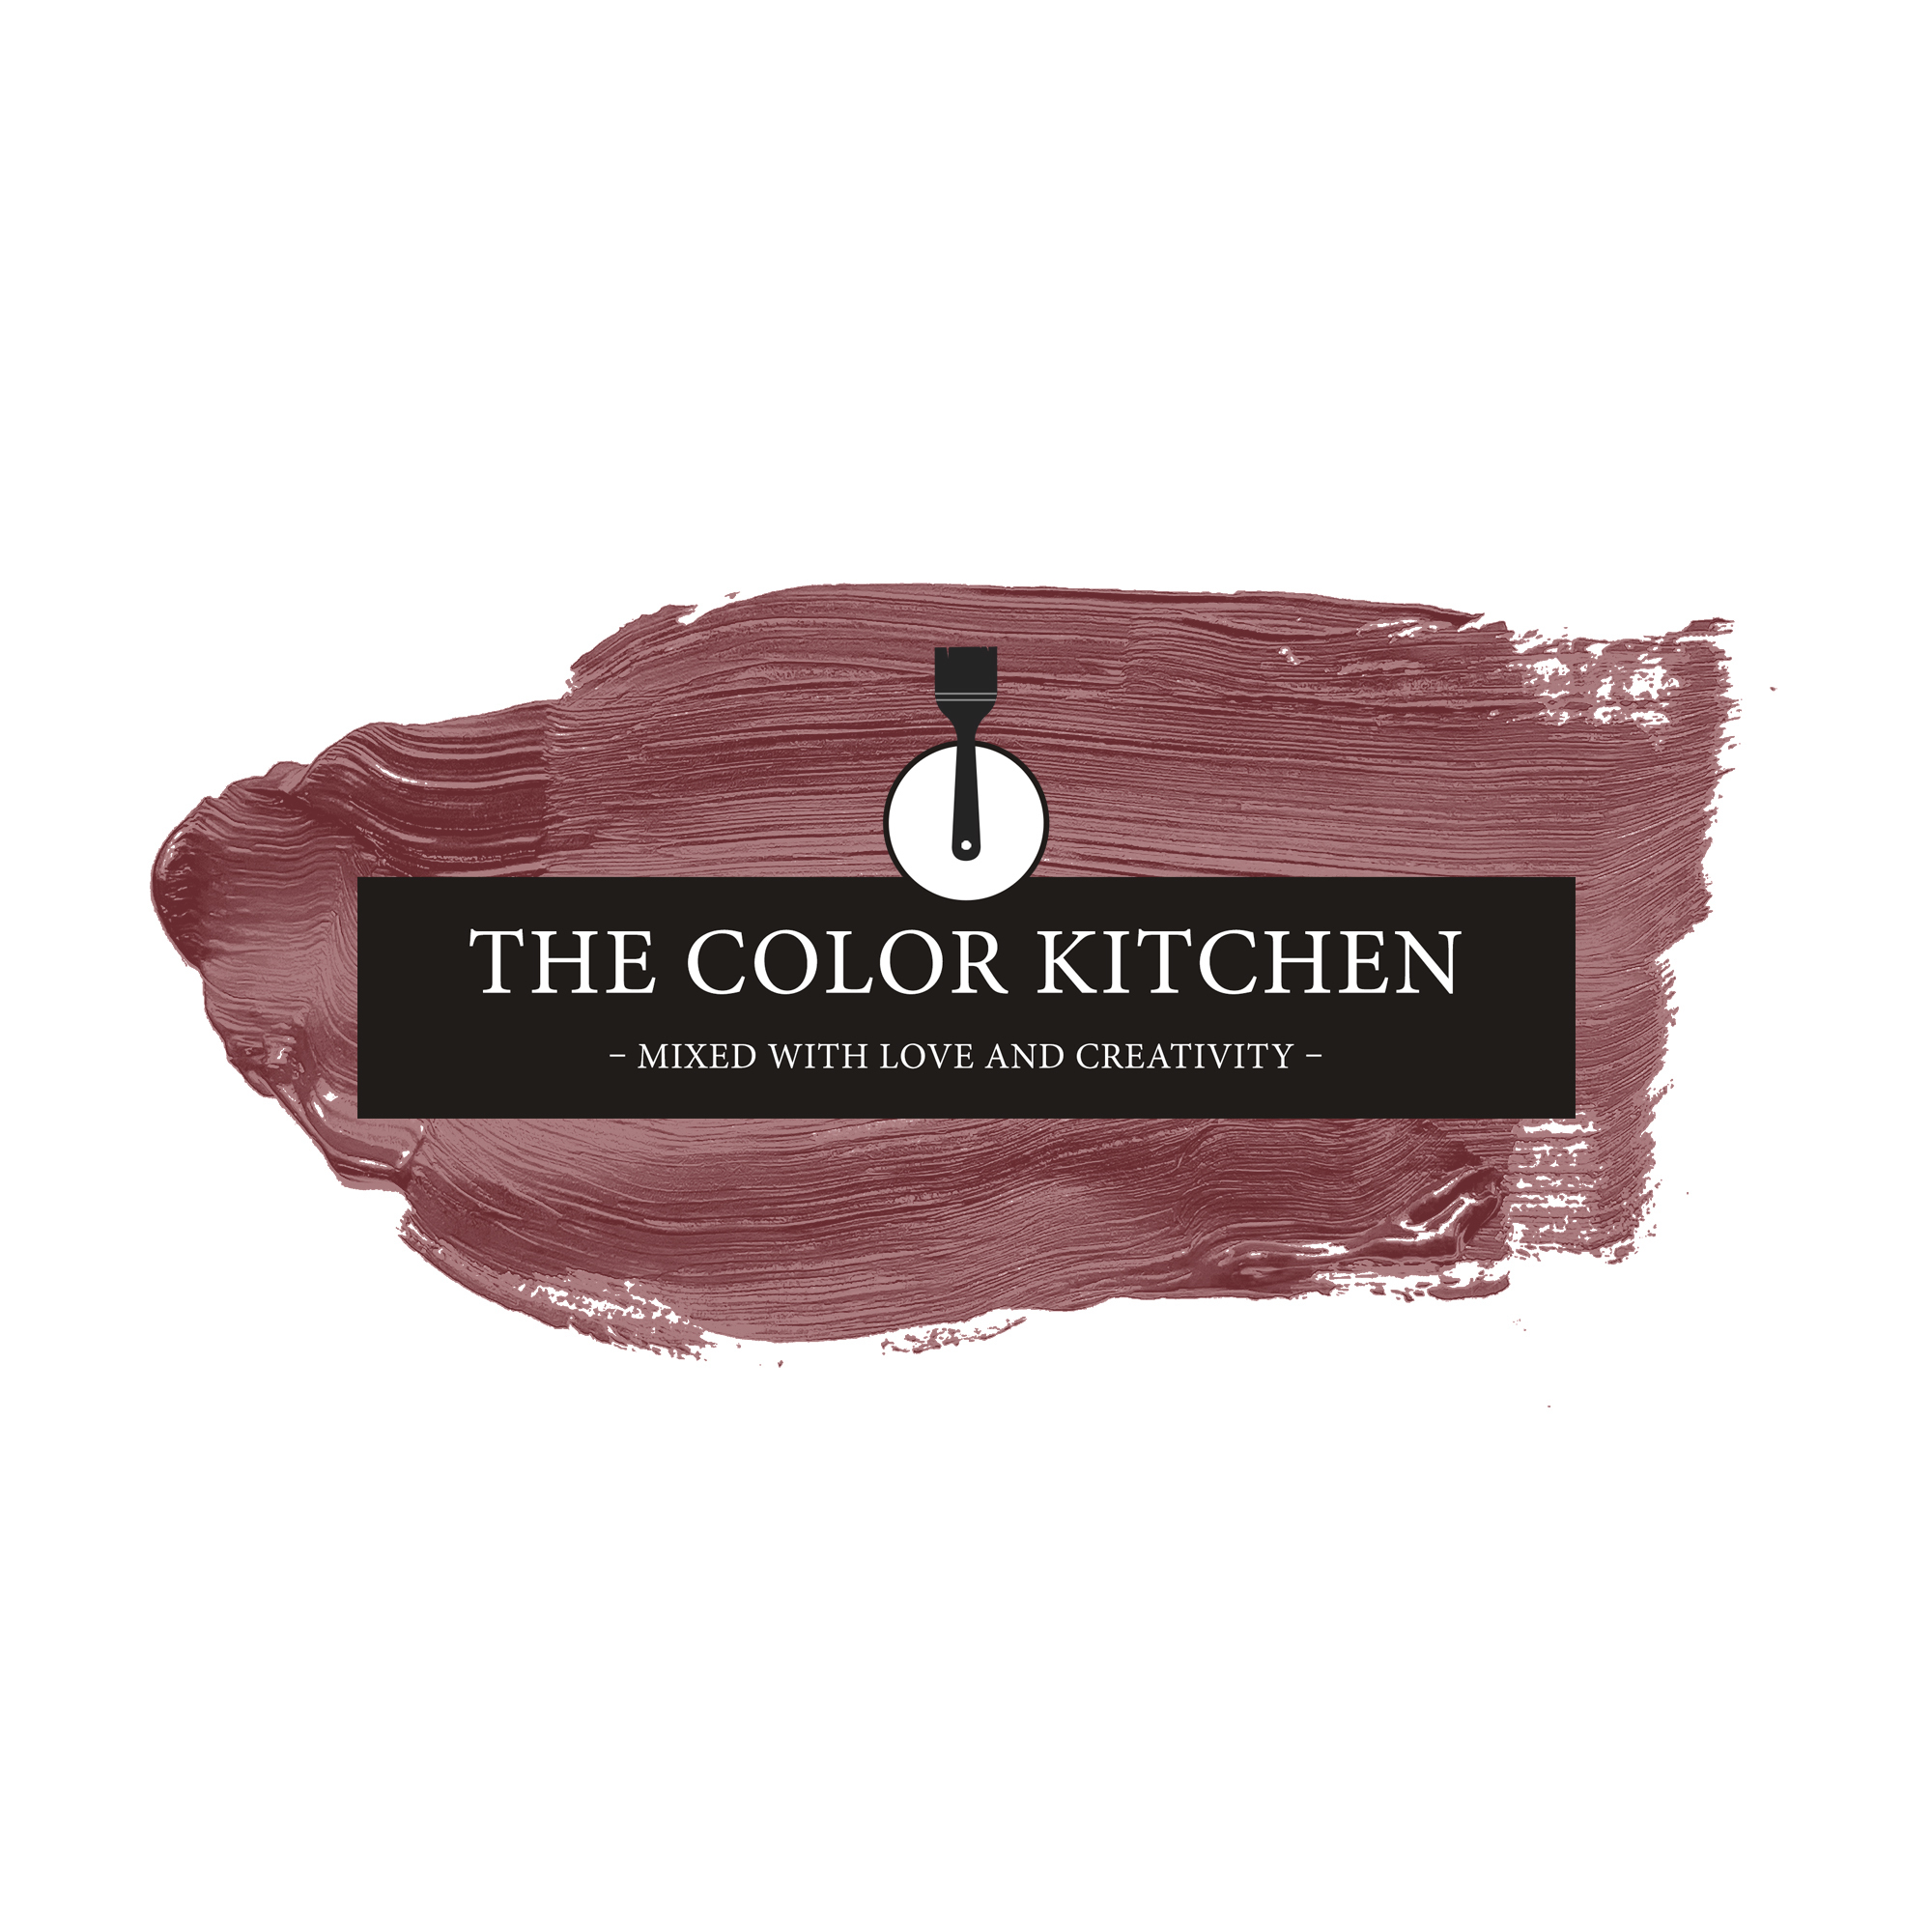 The Color Kitchen Sweet Marmelade 5 l